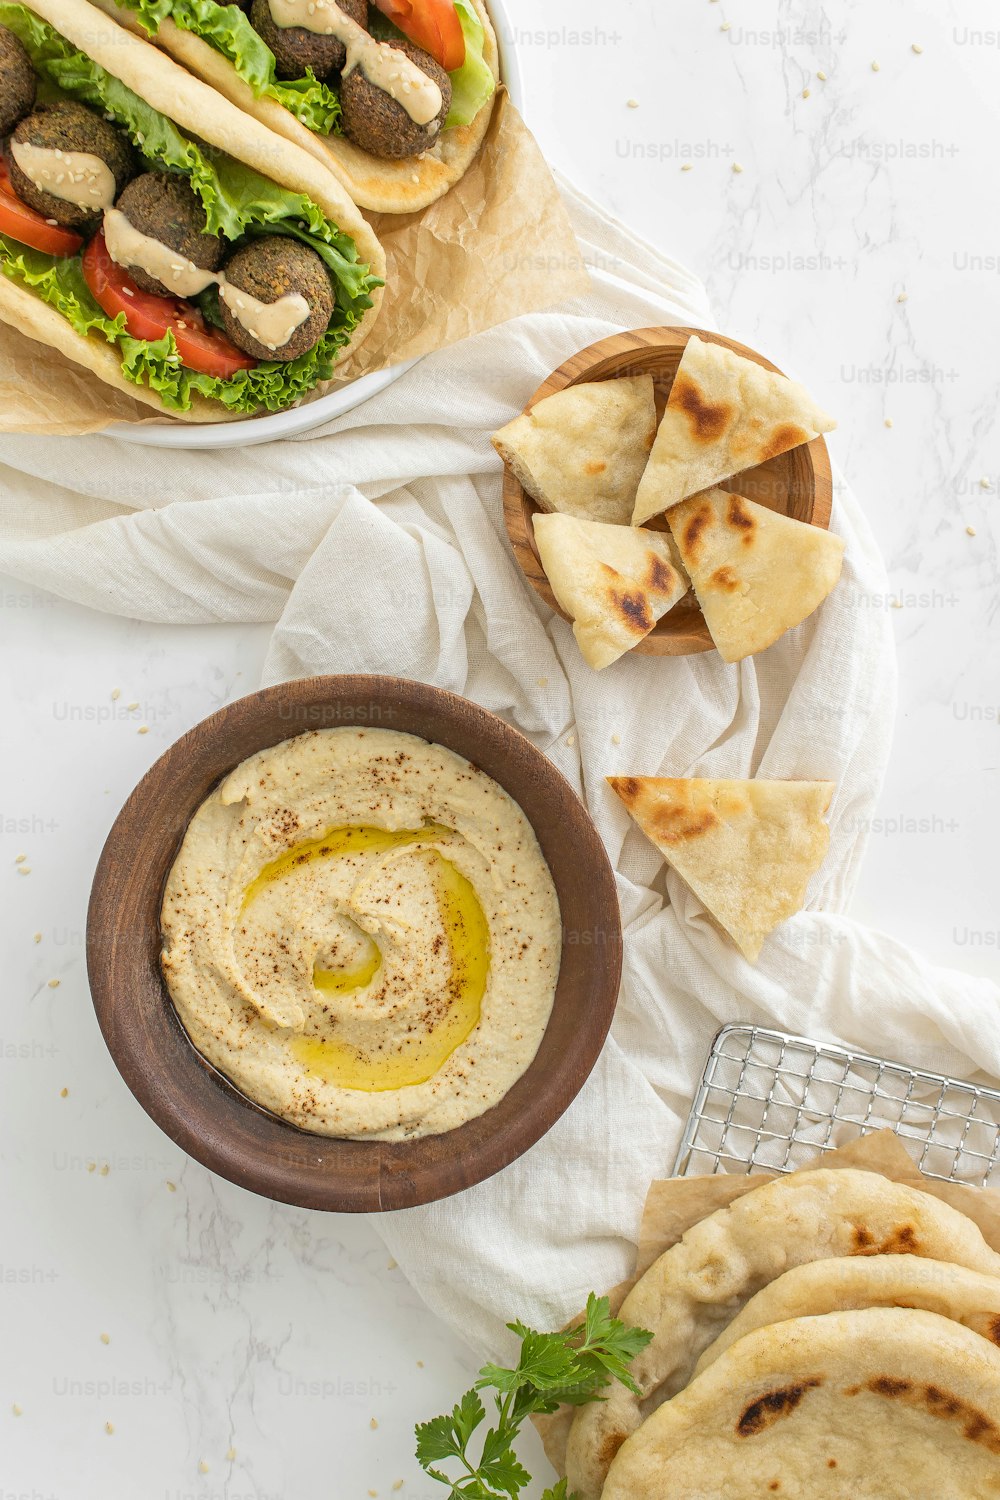 a plate of pita bread and a bowl of hummus